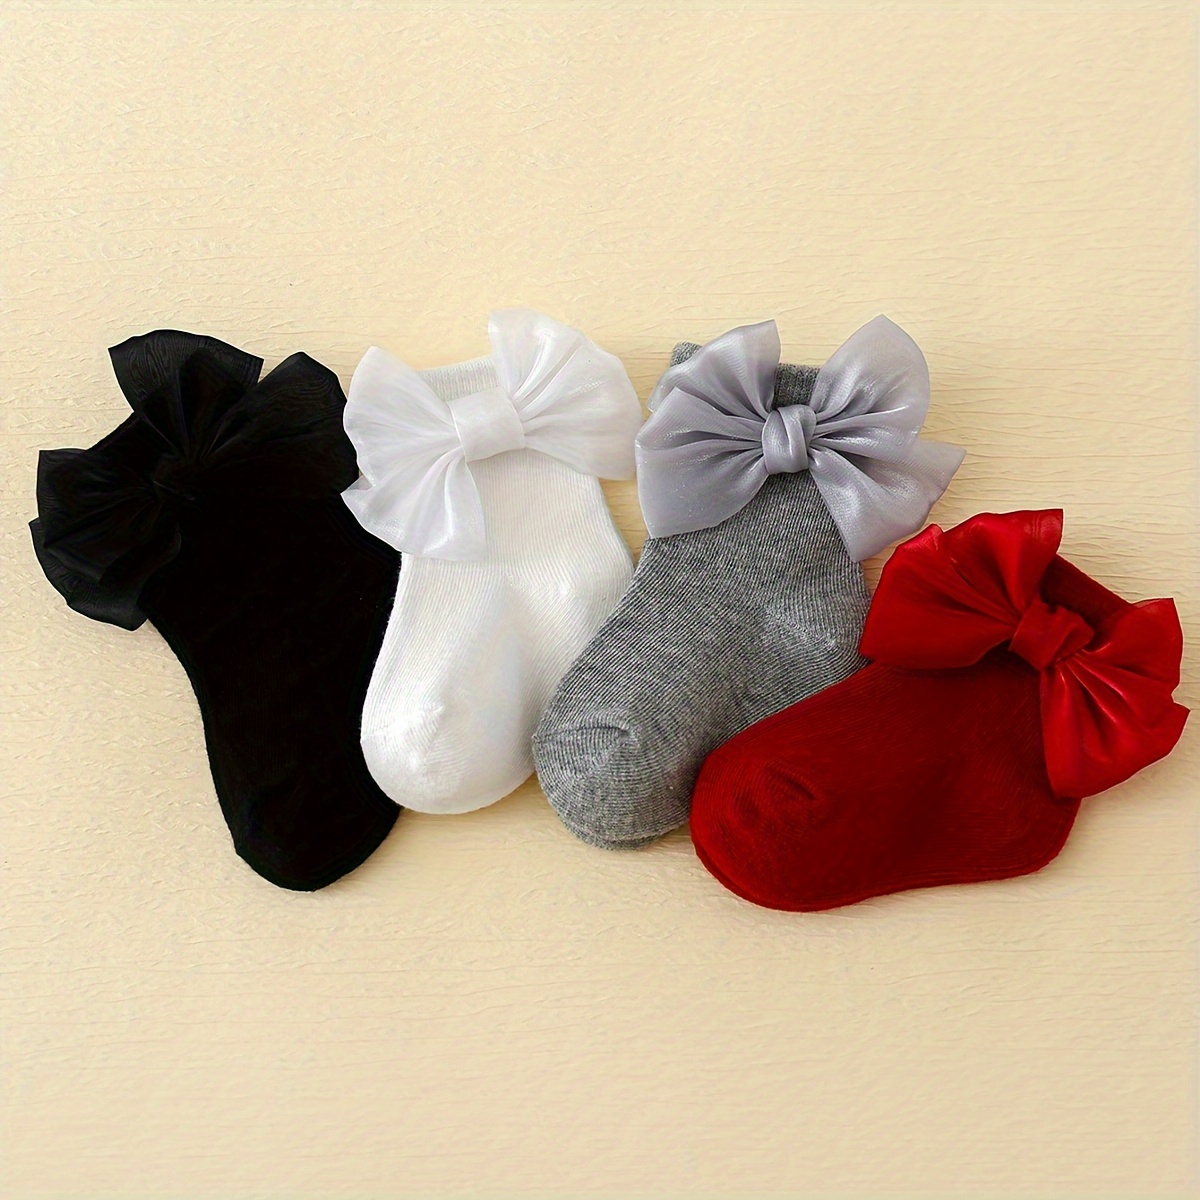 

4 Pairs Of Toddler's Cute Low-cut Ankle Socks, Solid Bowknot Design, Soft Comfy Cotton Blend Children's Socks For Girls All Seasons Wearing